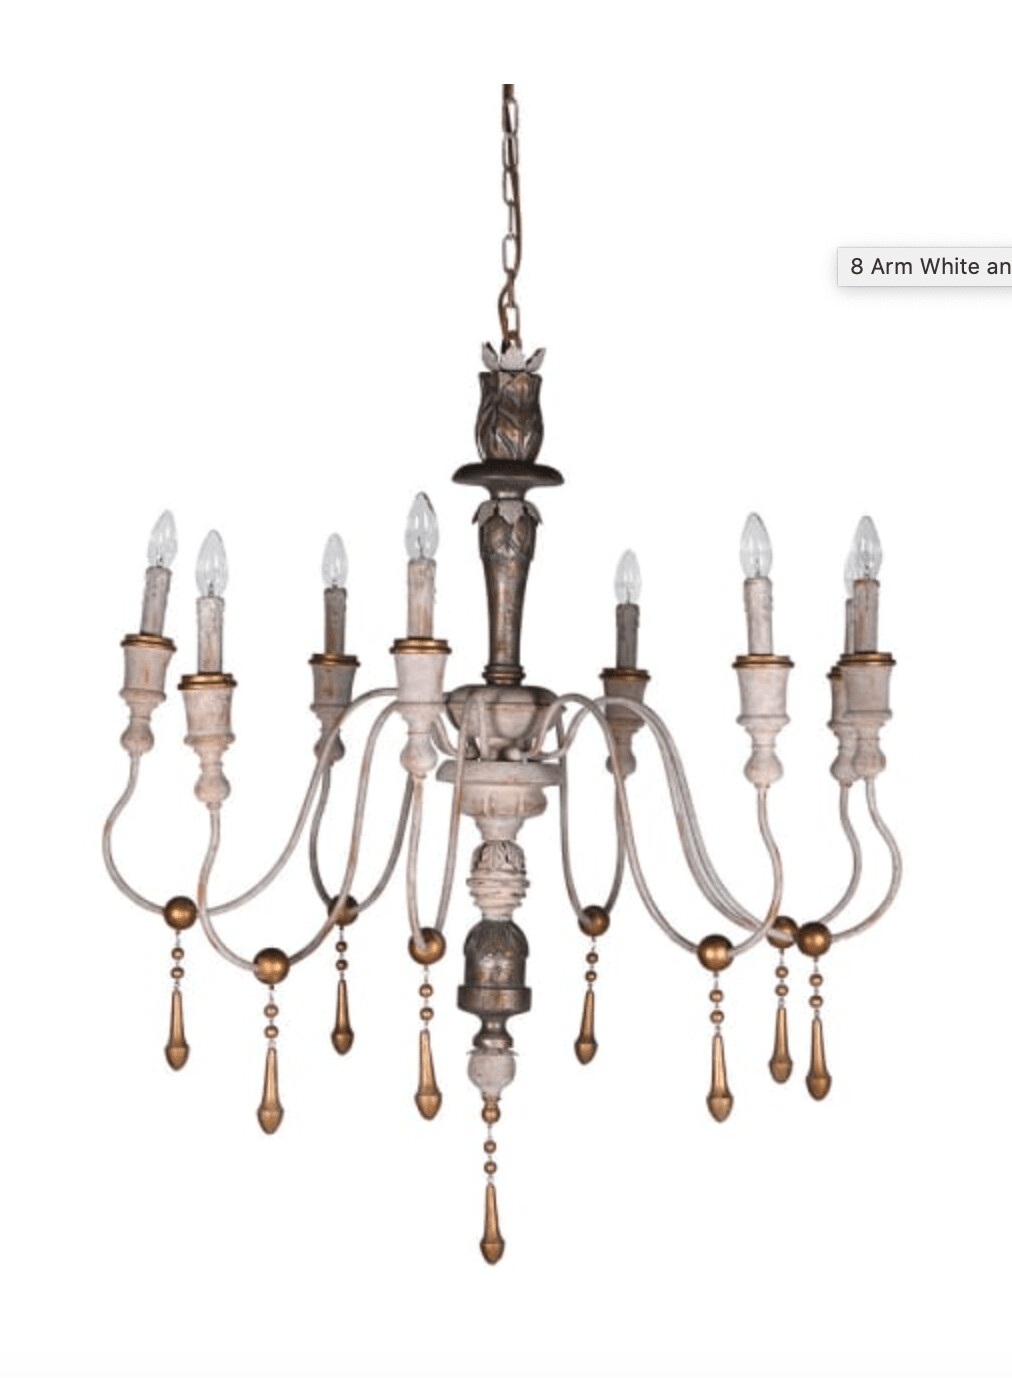 8 Arm White and Grey Chandelier